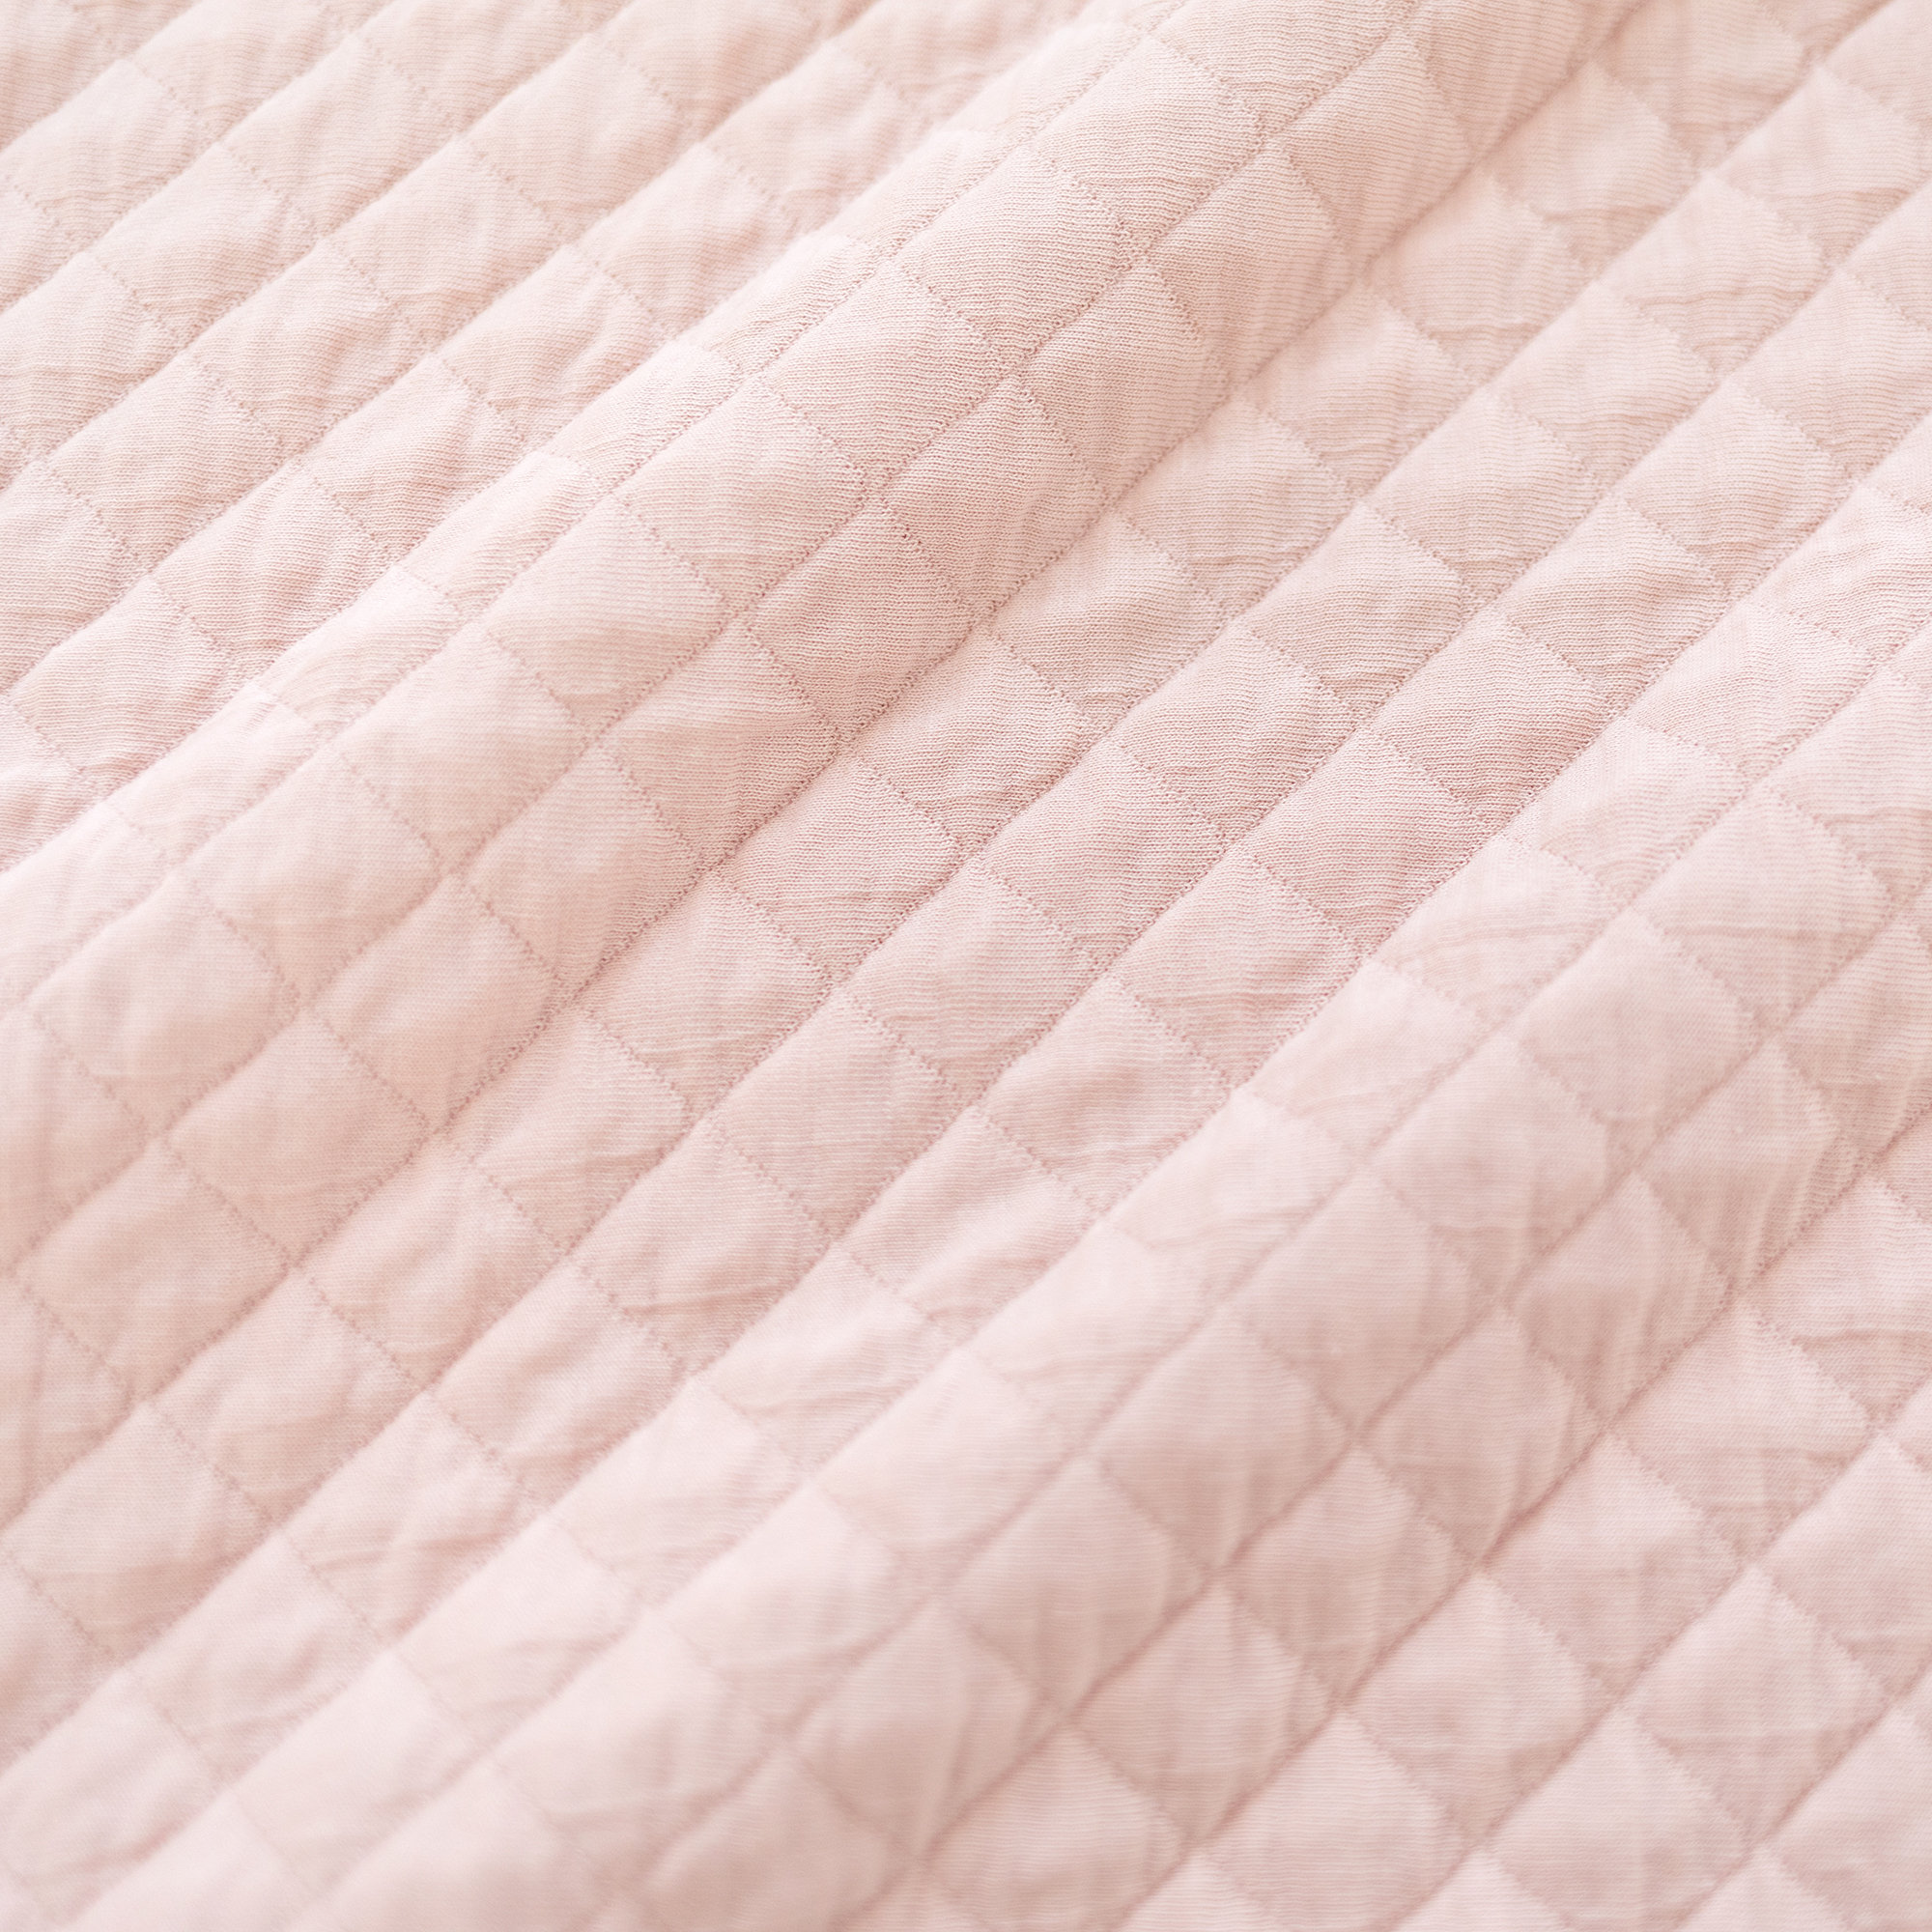 Bavoir waterproof Pady quilted jersey 37cm QUILT Blush